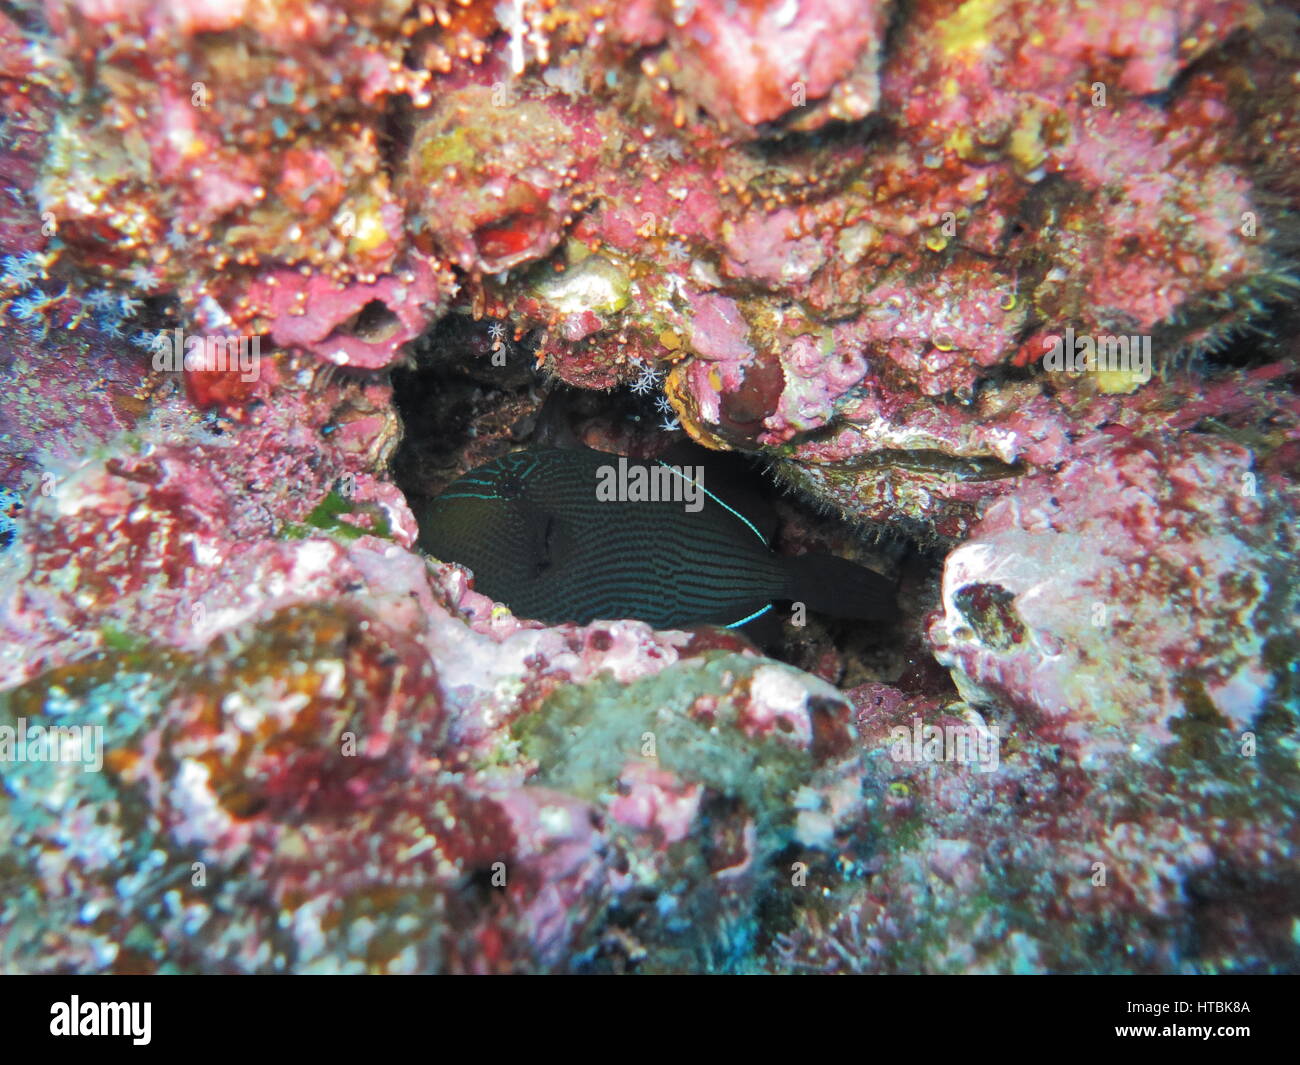 Black triggerfish or Black durgon ( Melichthys niger ) hiding in hole in rock Stock Photo